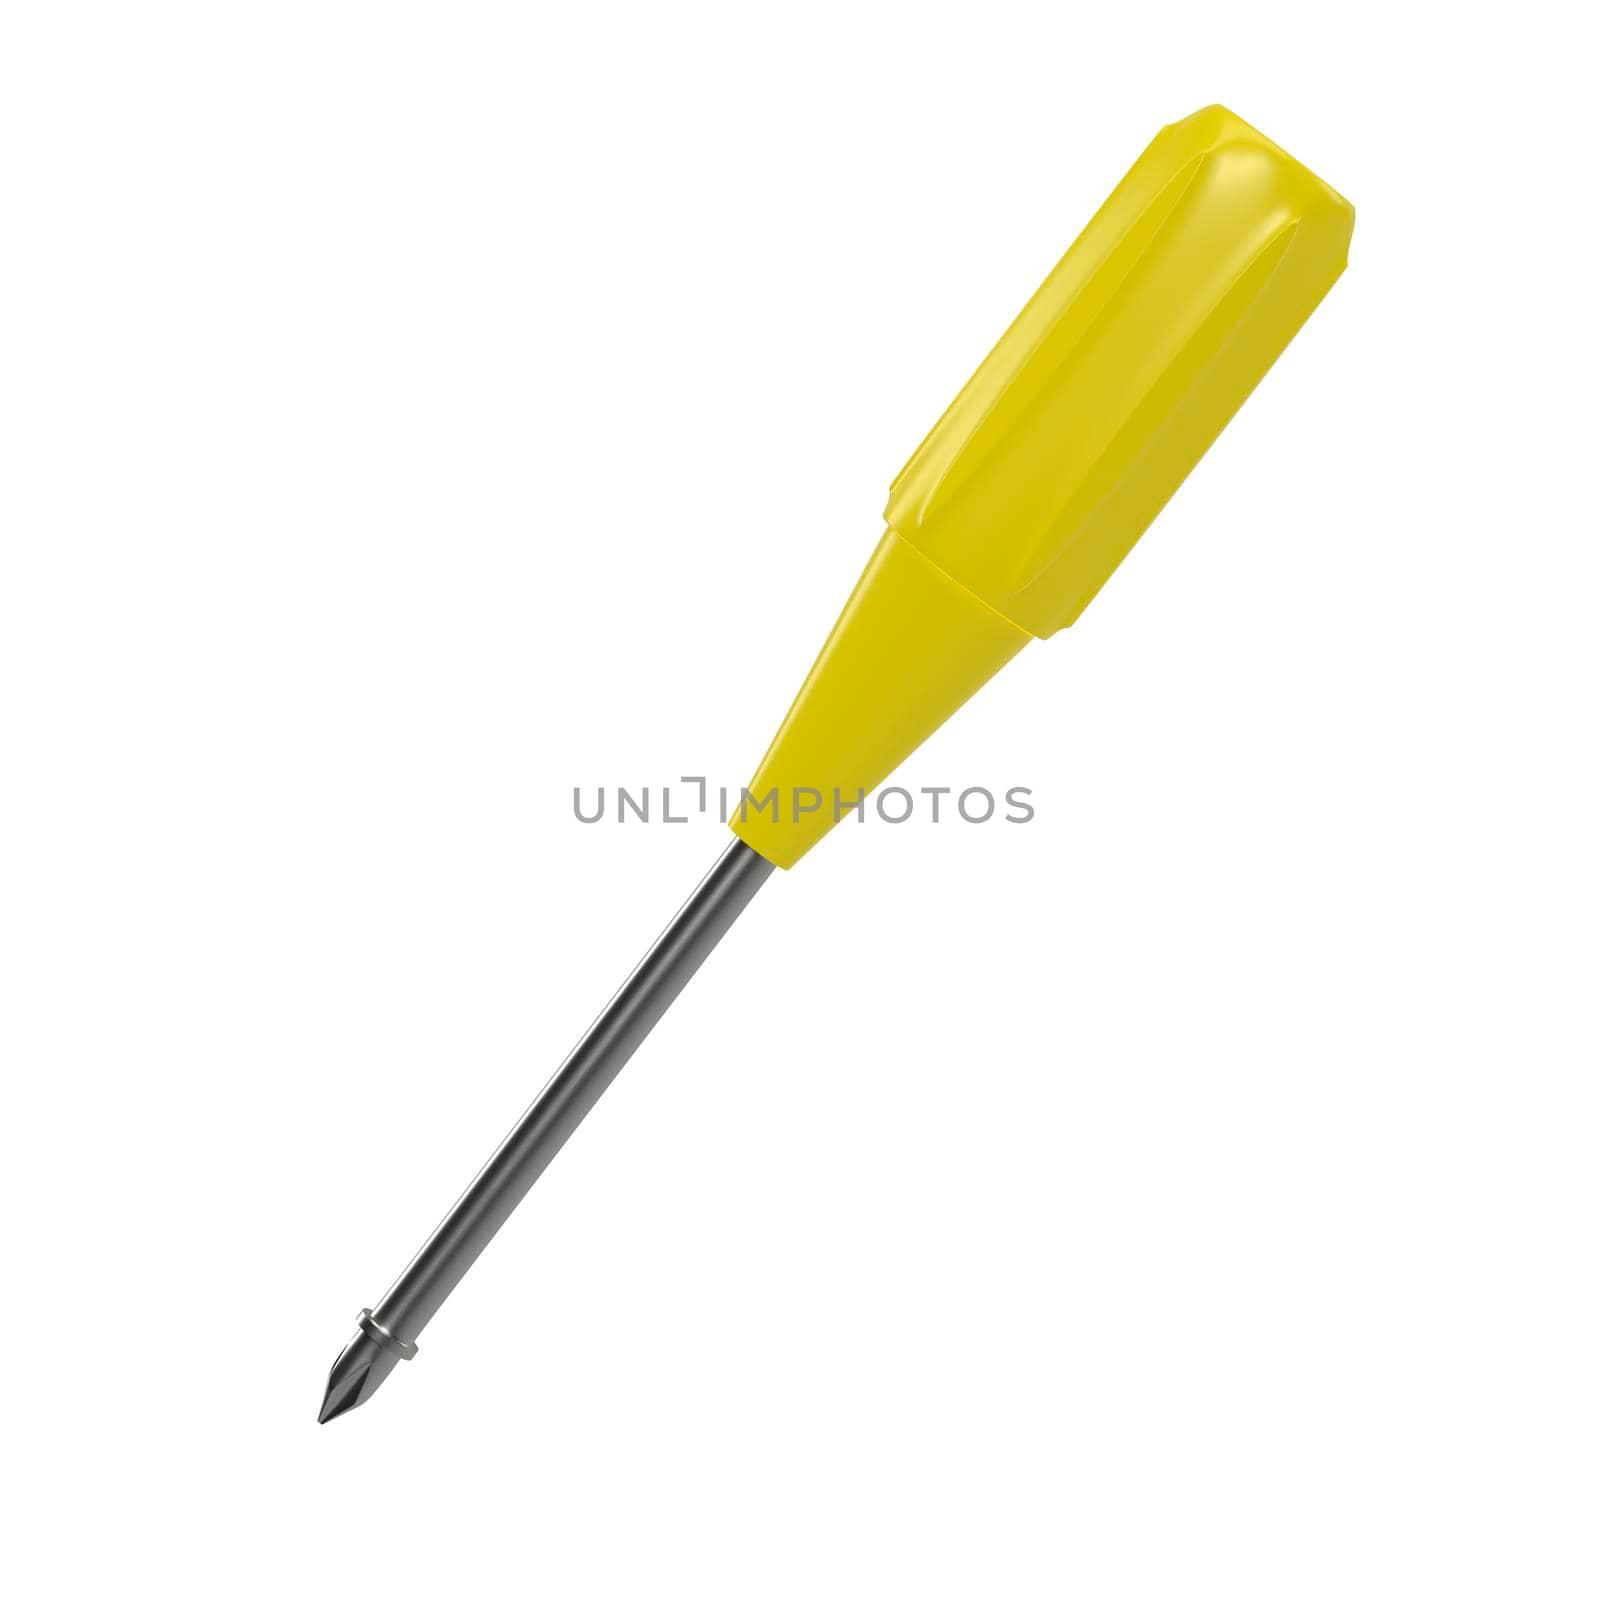 Screwdriver isolated on a white background. 3D rendering